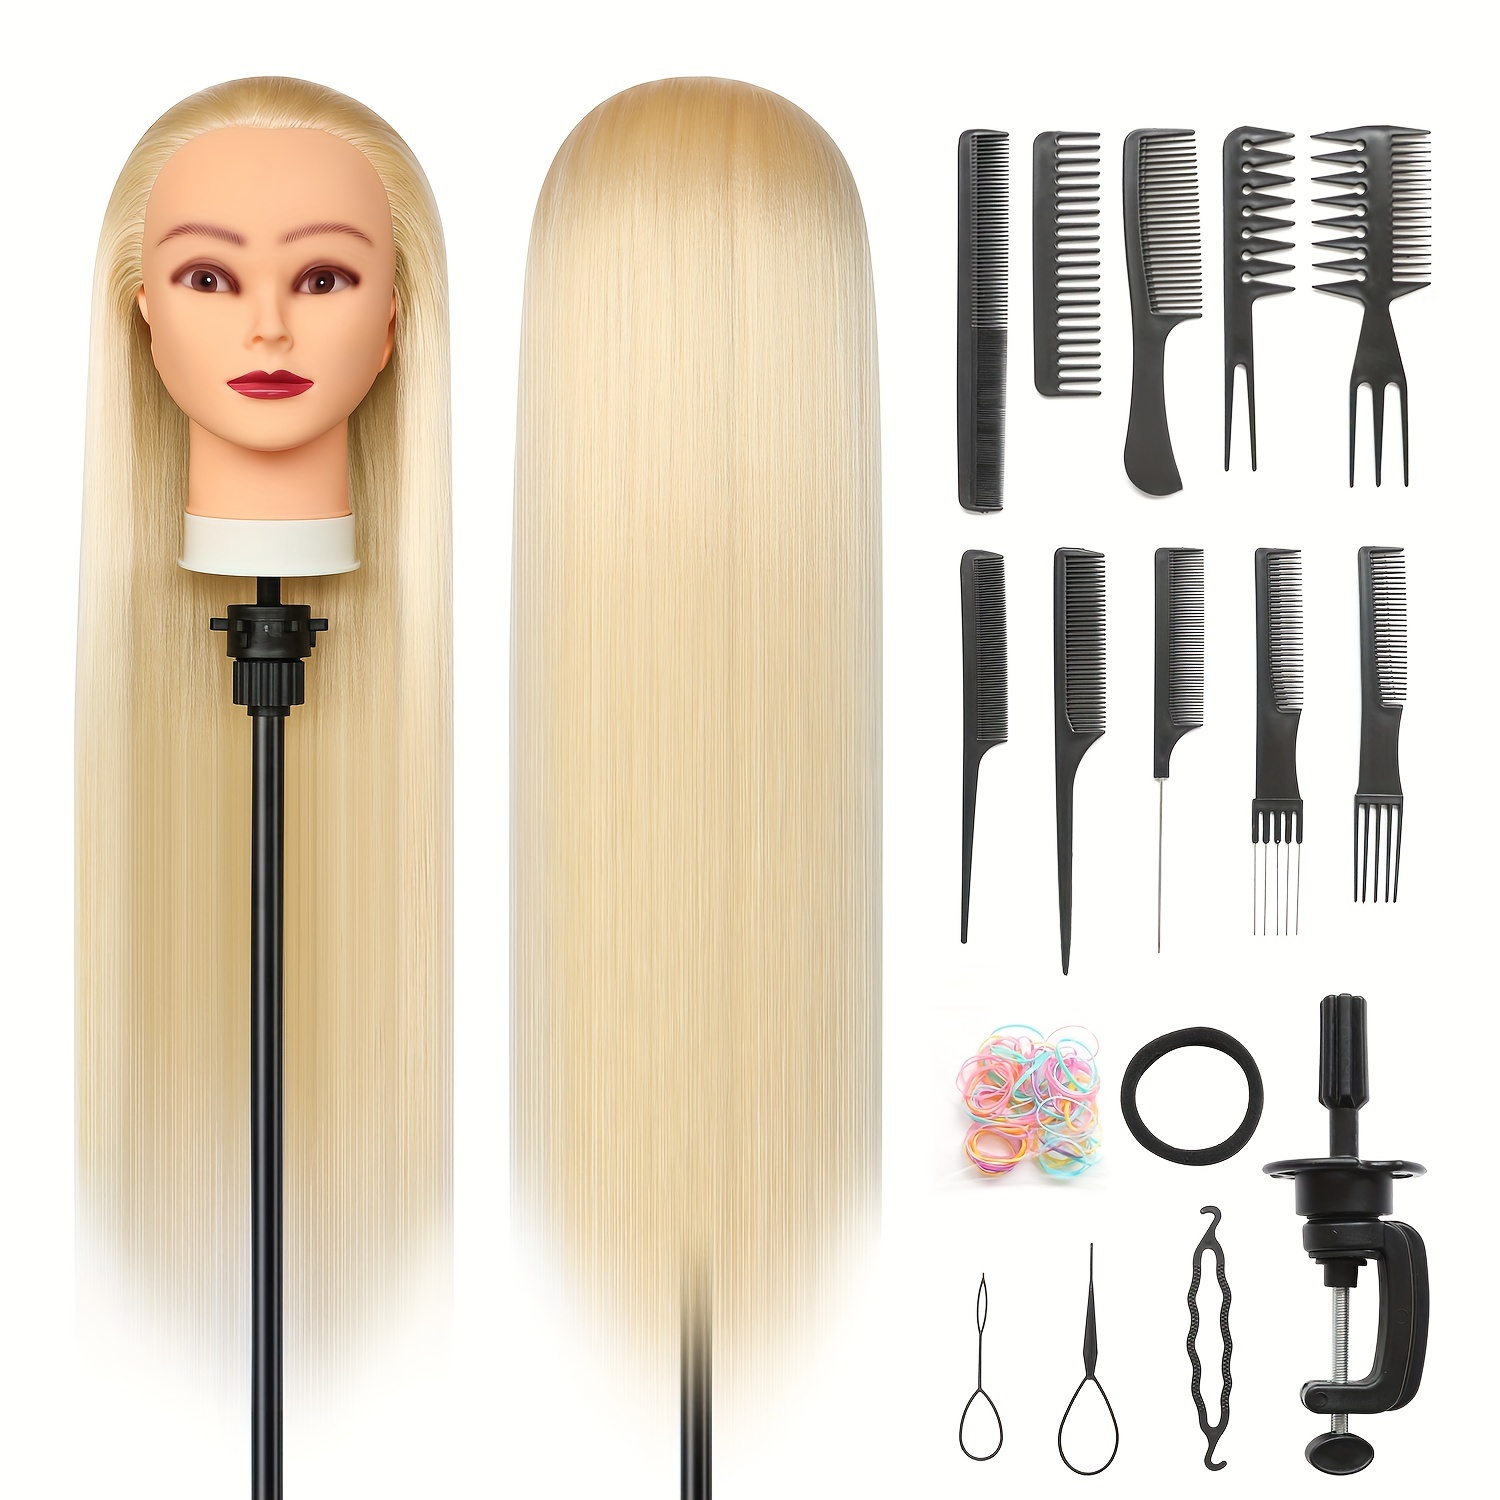  Mannequin Head with Hair 70% Real Human Hair 26-28''  Cosmetology Mannequin Head for Styling Practice on Braiding Manikin Head  with Clamp Stand and Tools (No Makeup - Light Blonde) 